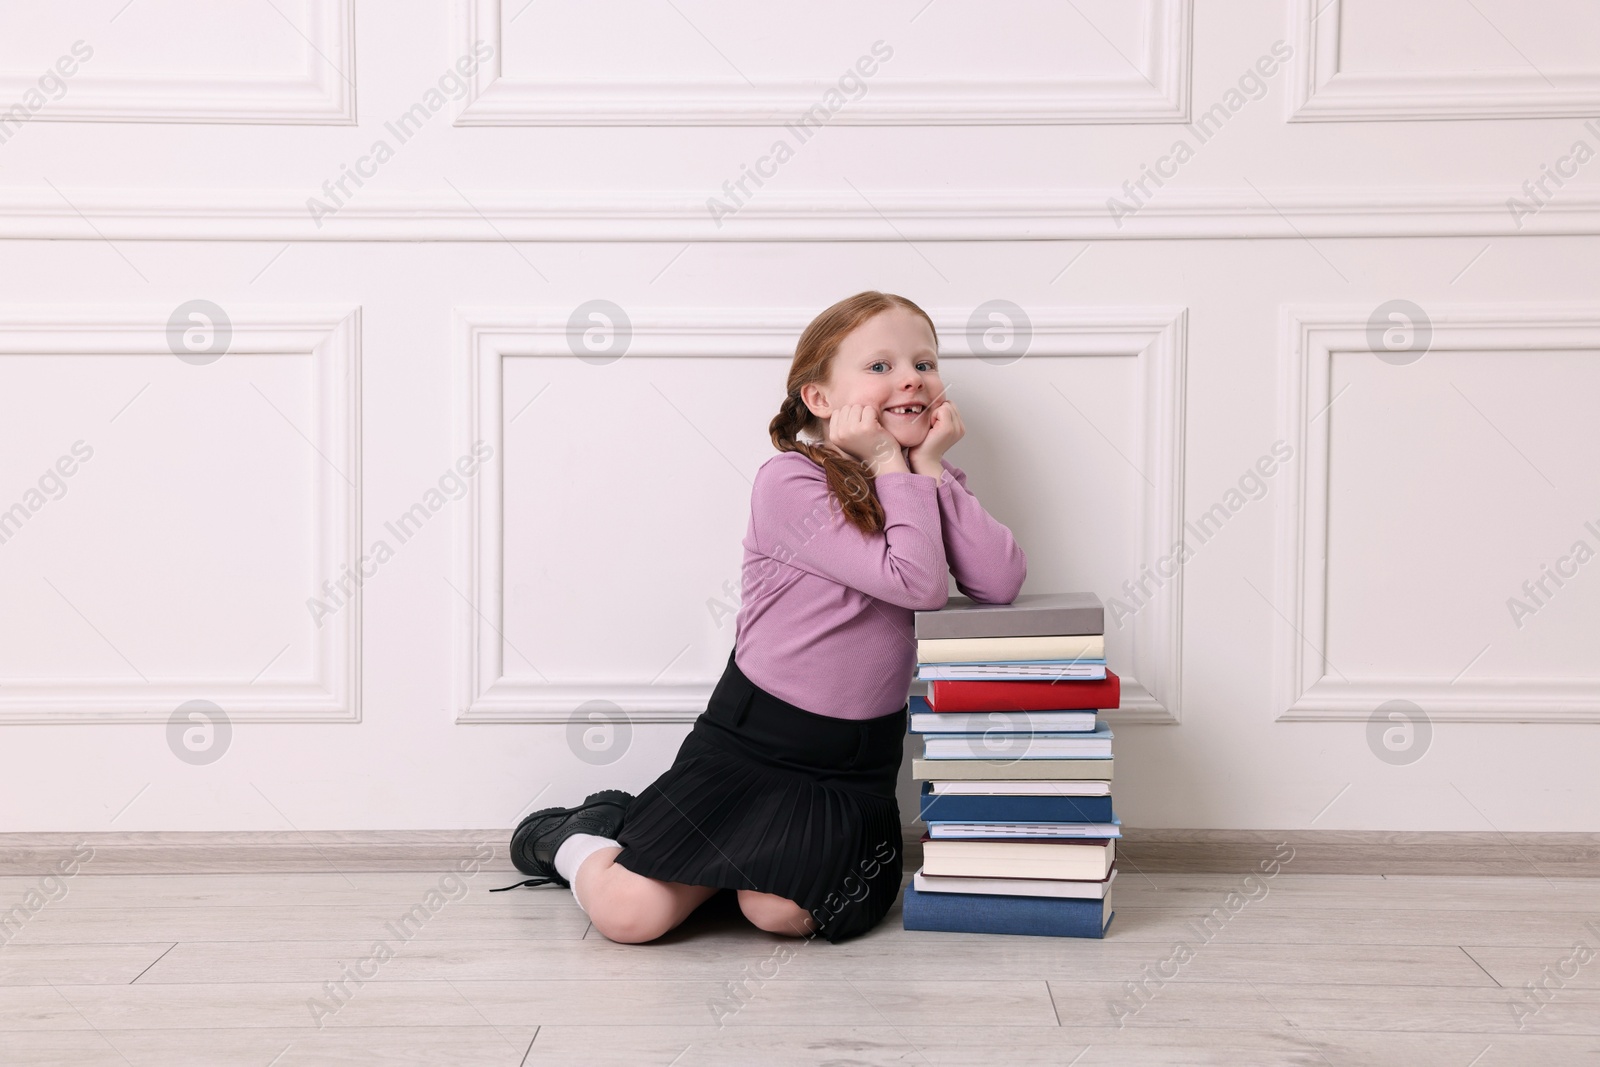 Photo of Smiling girl with stack of books on floor indoors